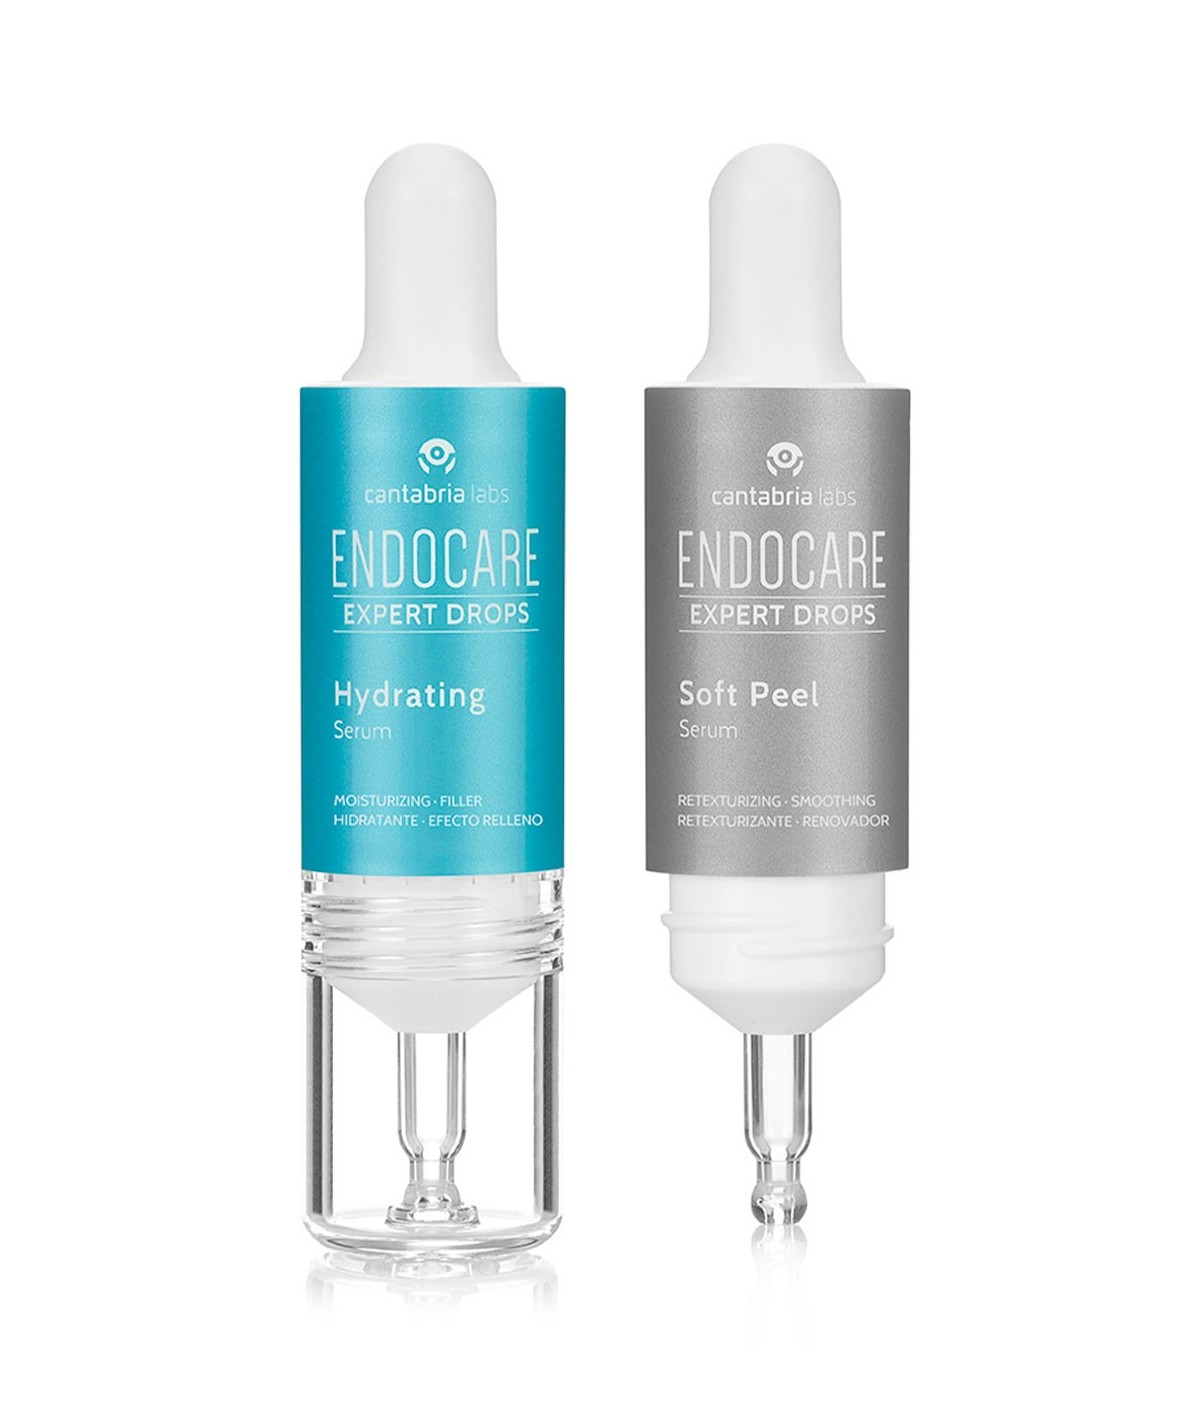 ENDOCARE EXPERT DROPS HYDRATING PROTOCOL